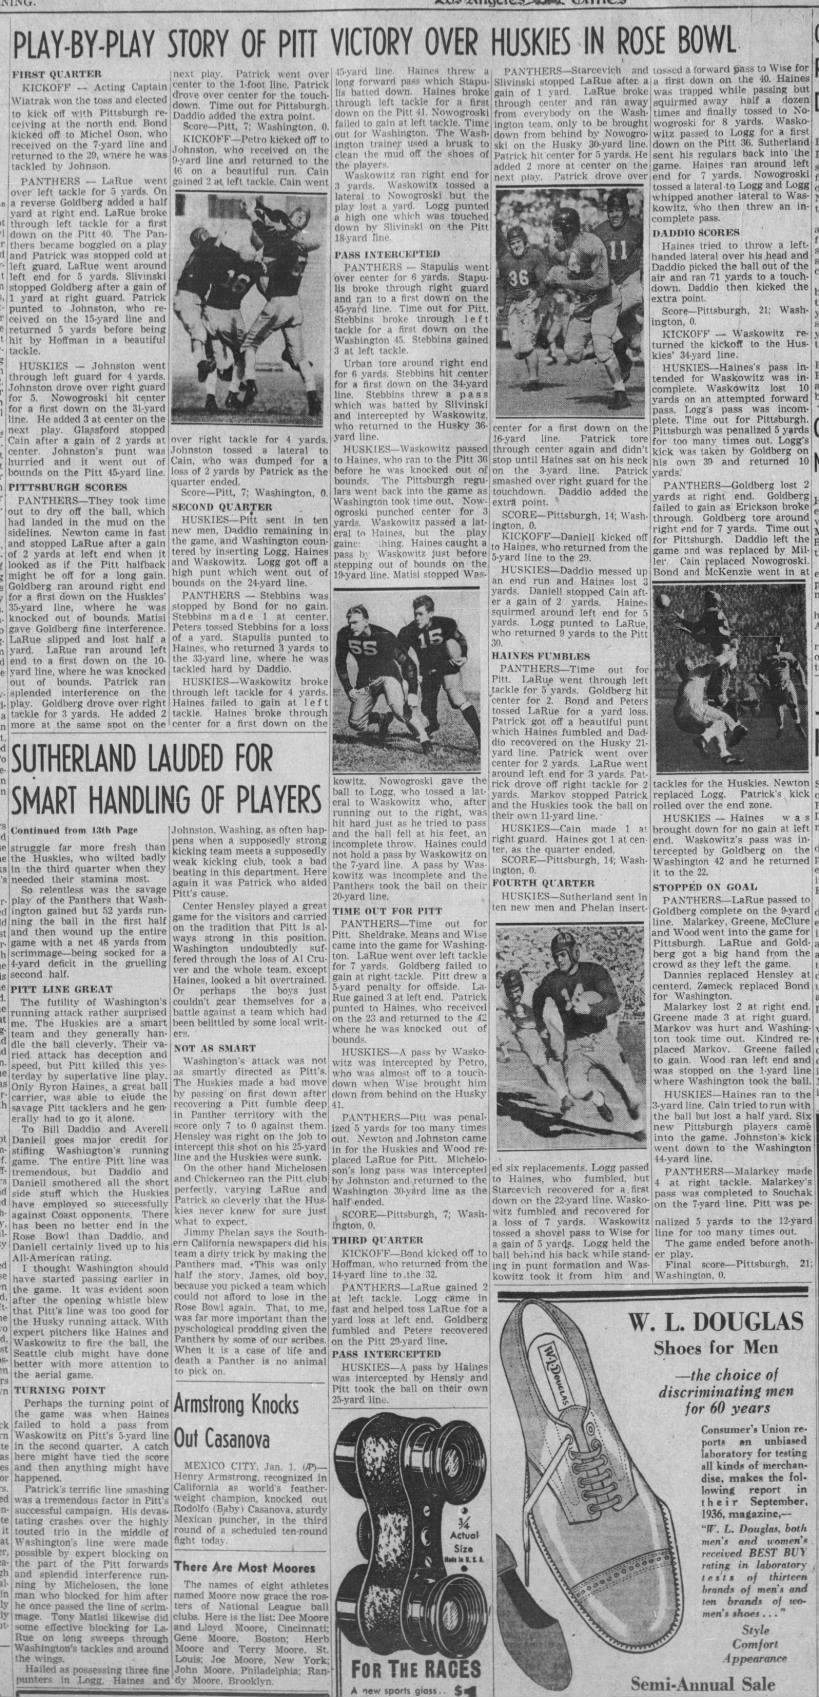 Play-By-Play 1937 Rose Bowl